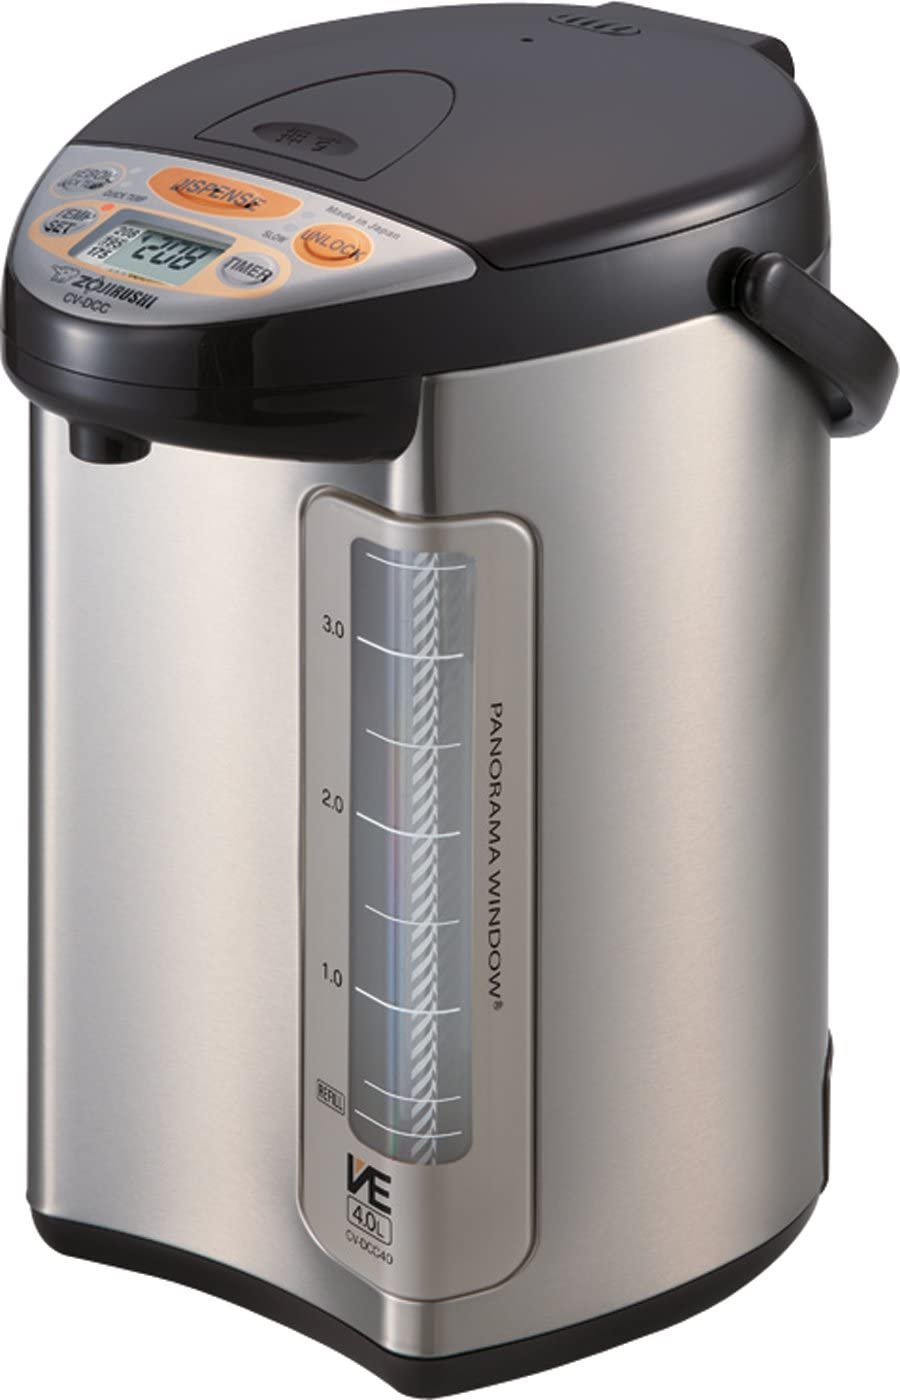 Review of Zojirushi America Corporation Hybrid Water Boiler and Warmer, 4-Liter